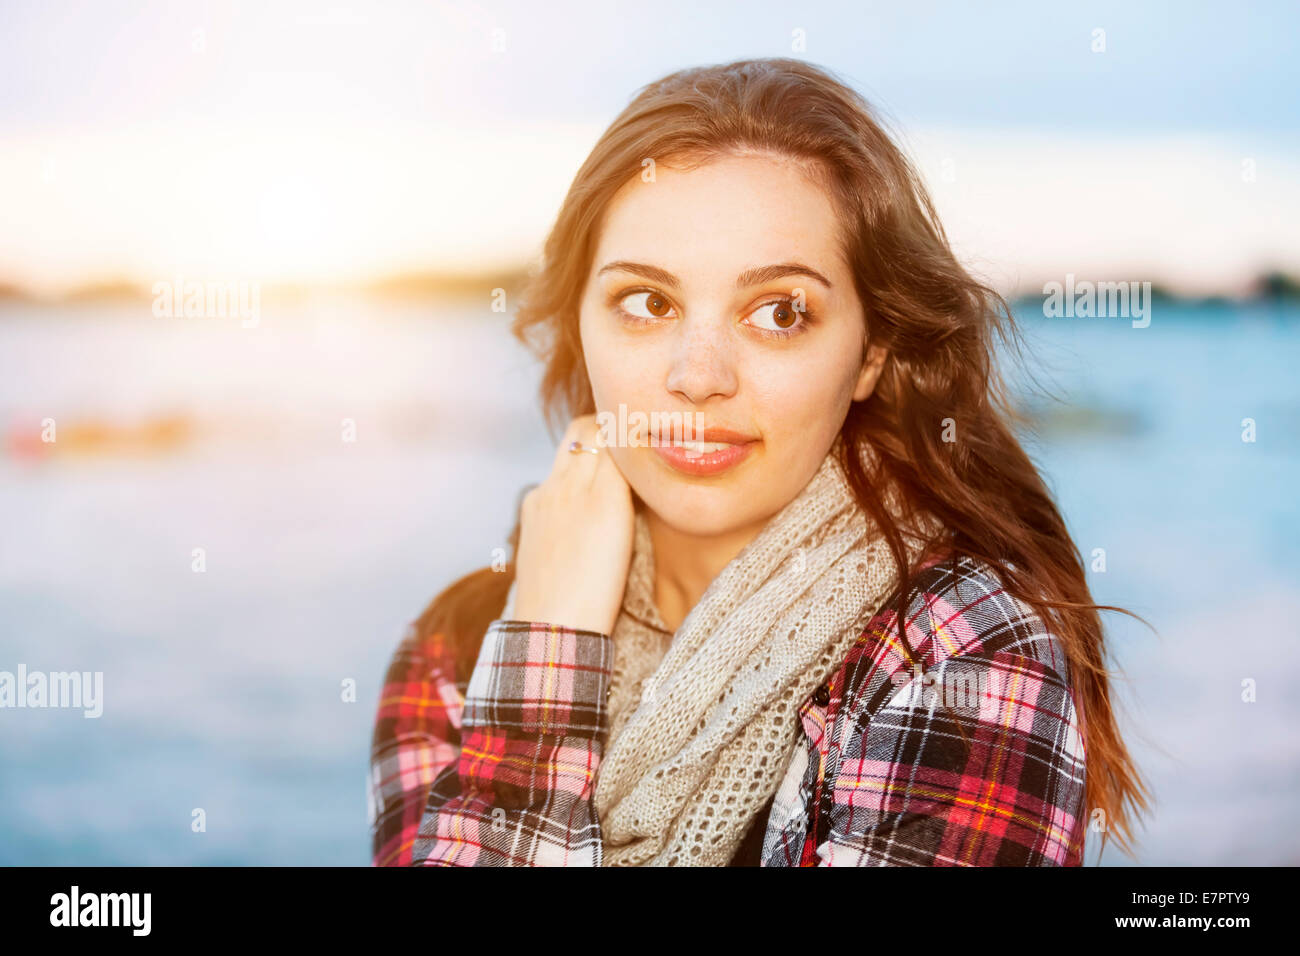 Candid portrait of young brunette woman at sunset looking away with copy space Stock Photo